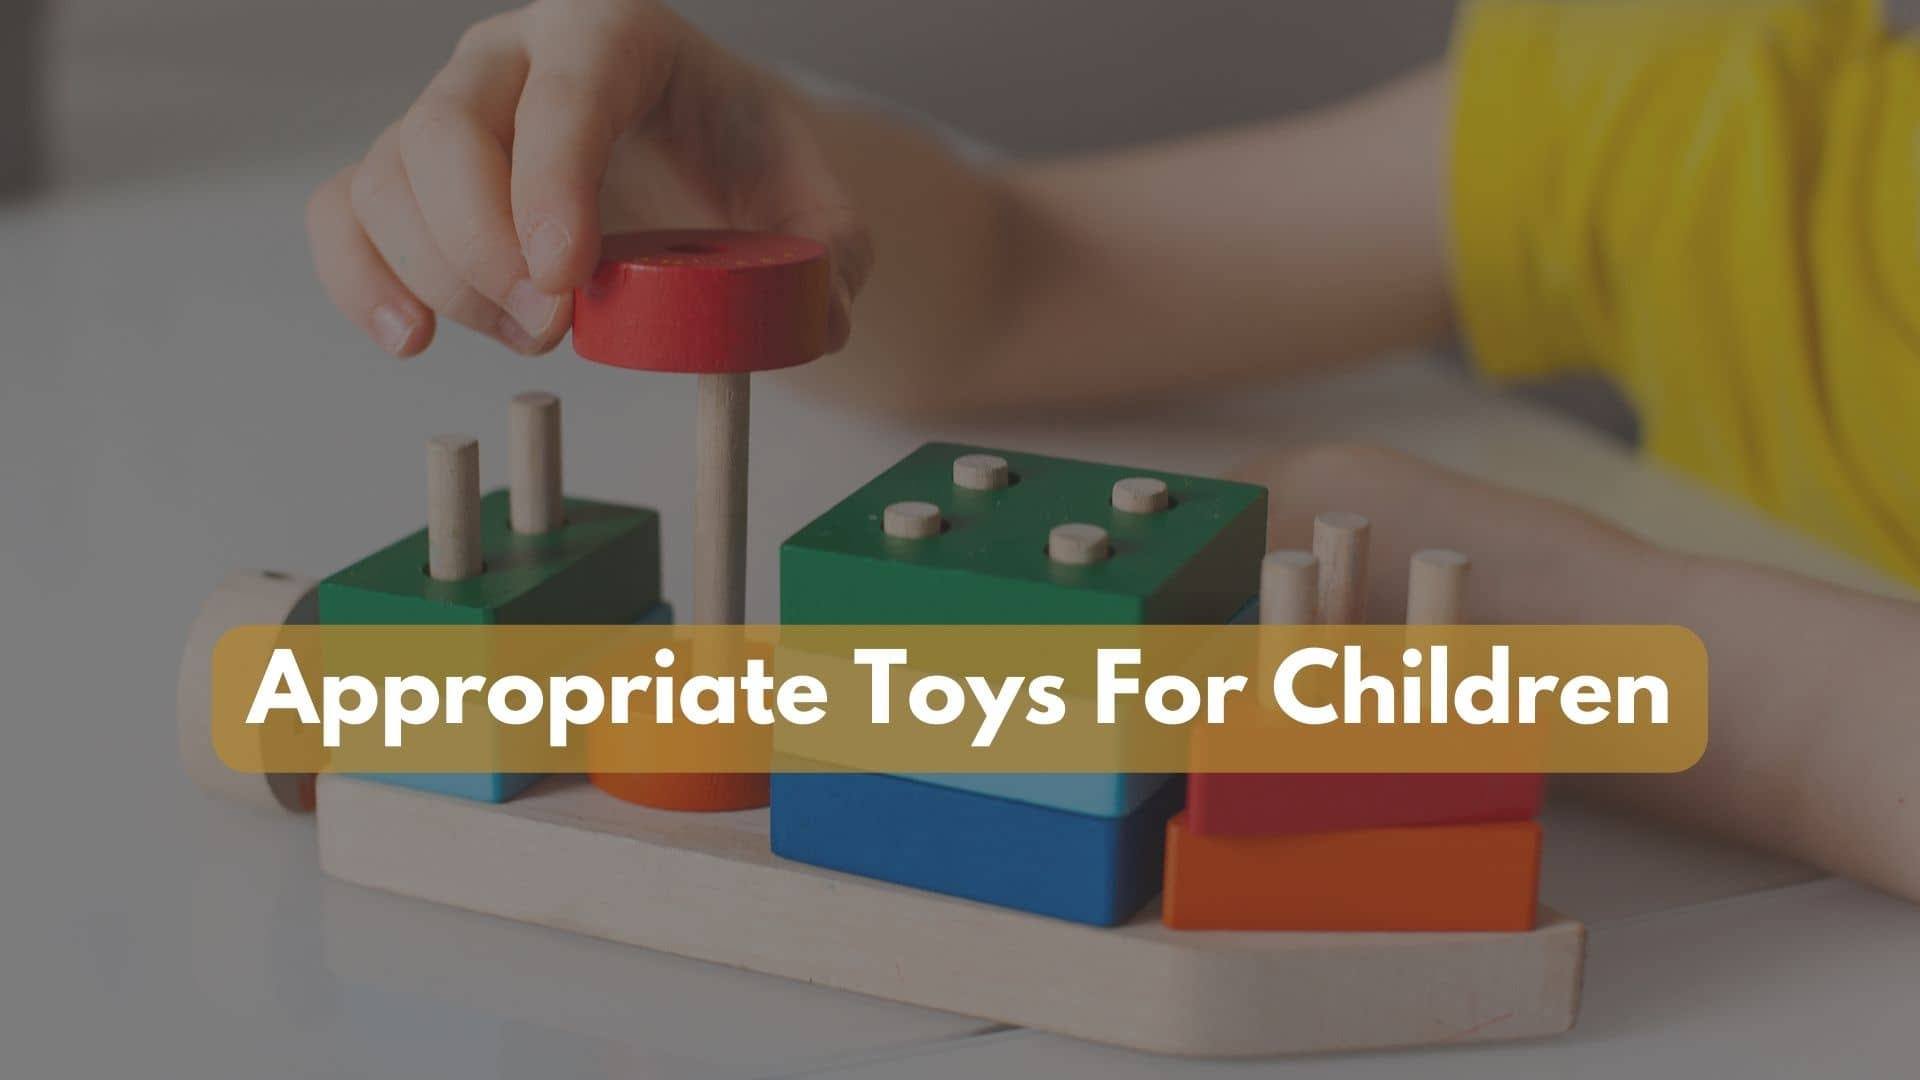 Choosing Age Appropriate Toys For Children